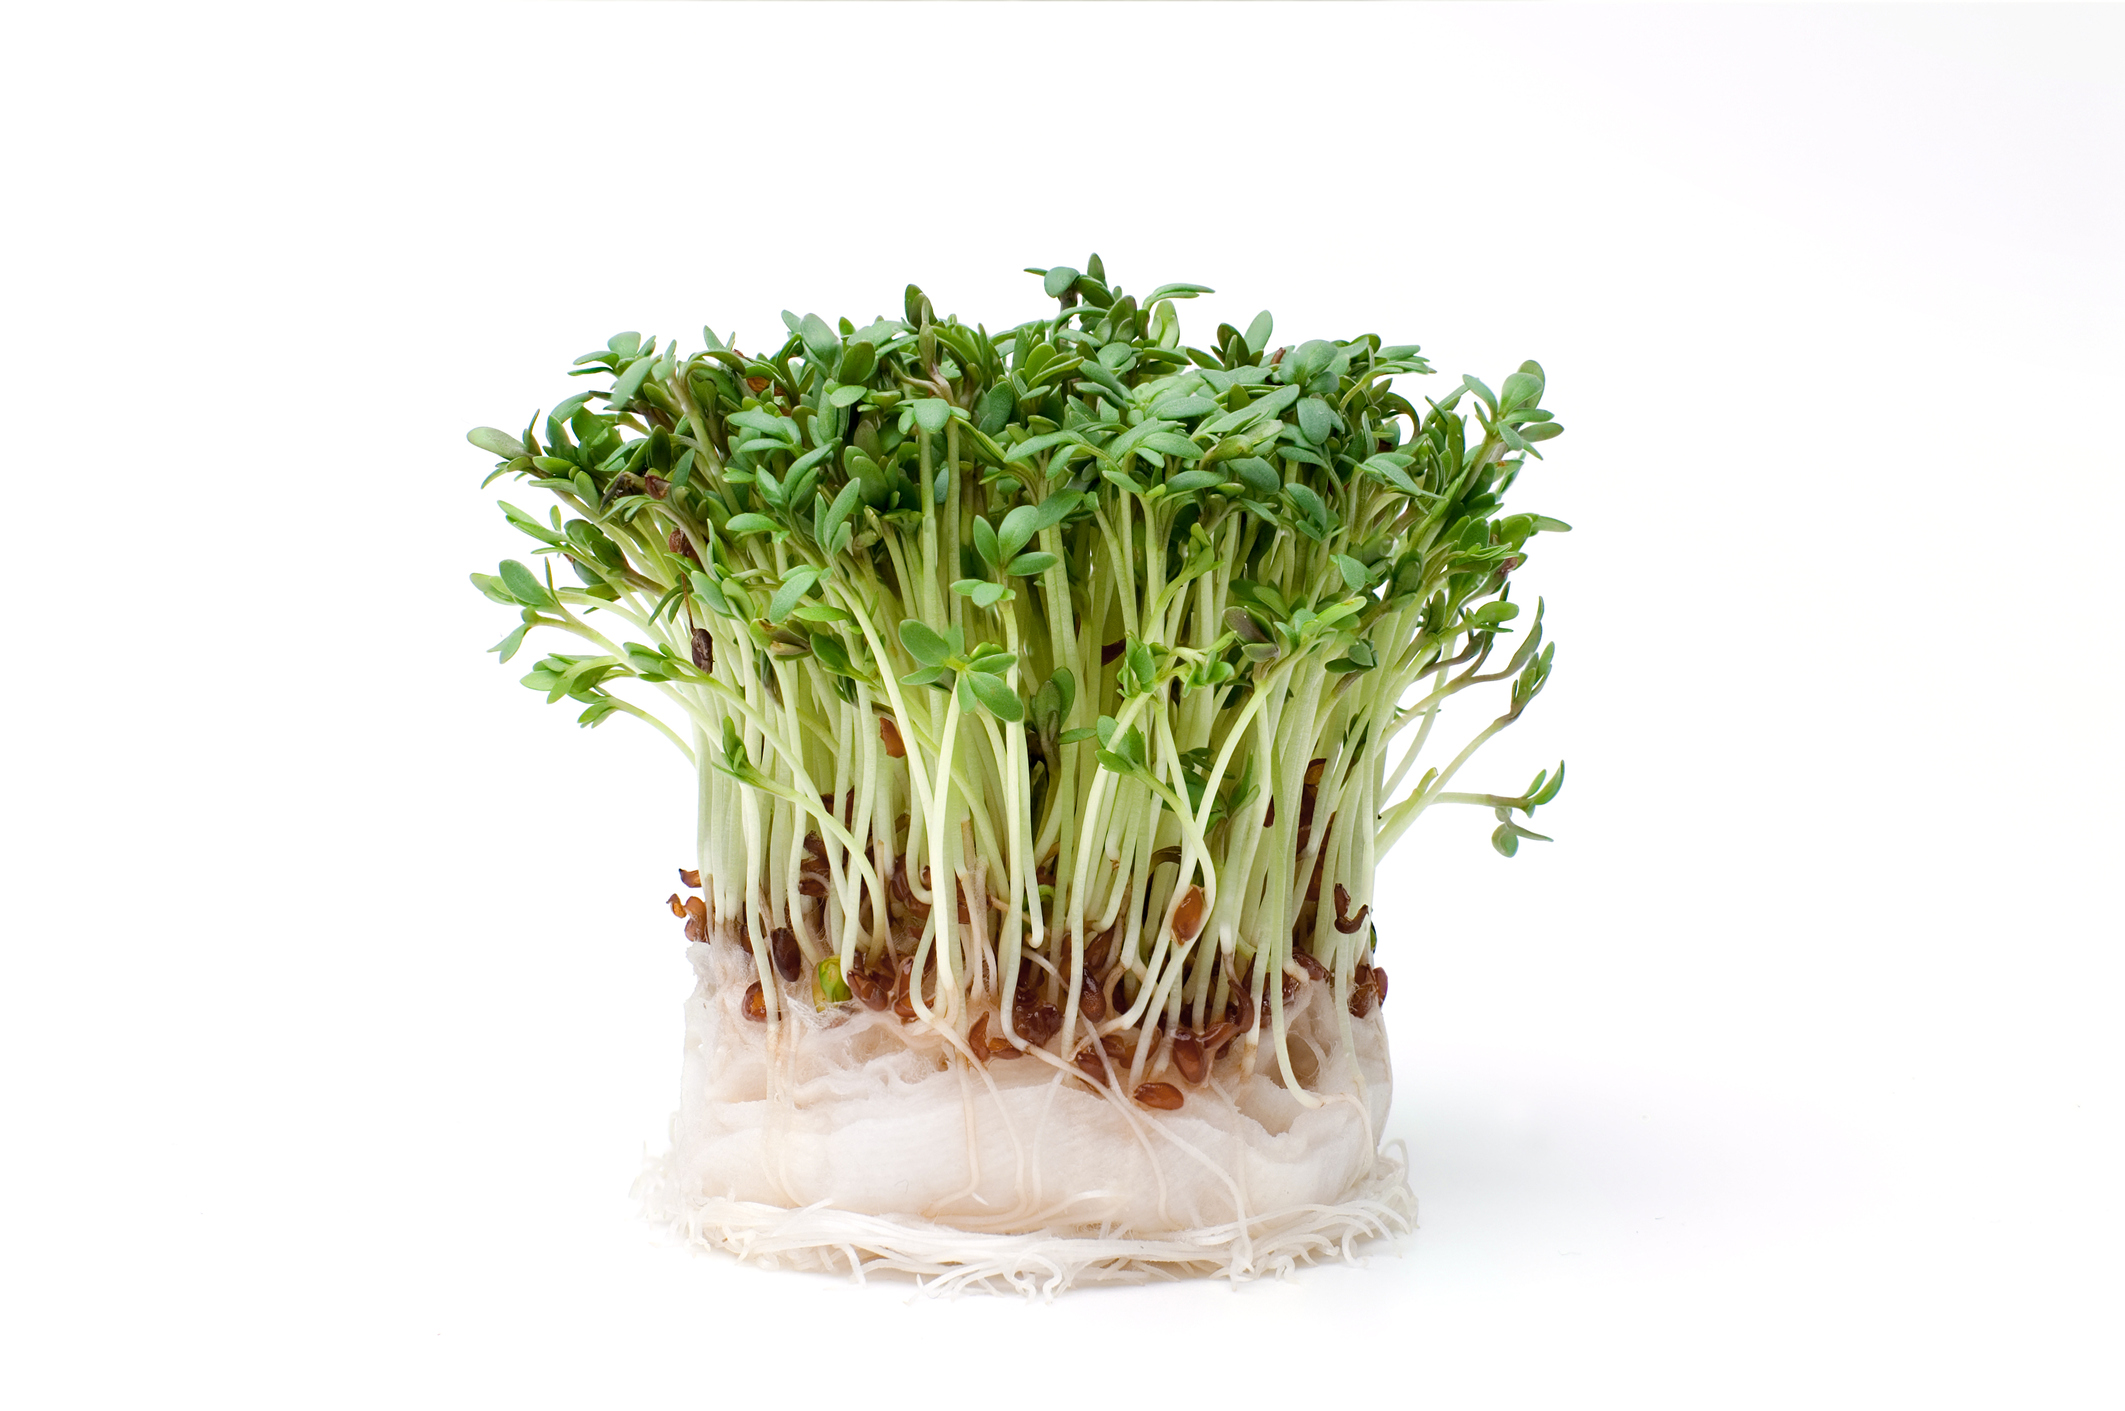 B12 breakthrough: Discovery could boost vitamin B12 for veggies … using  cress